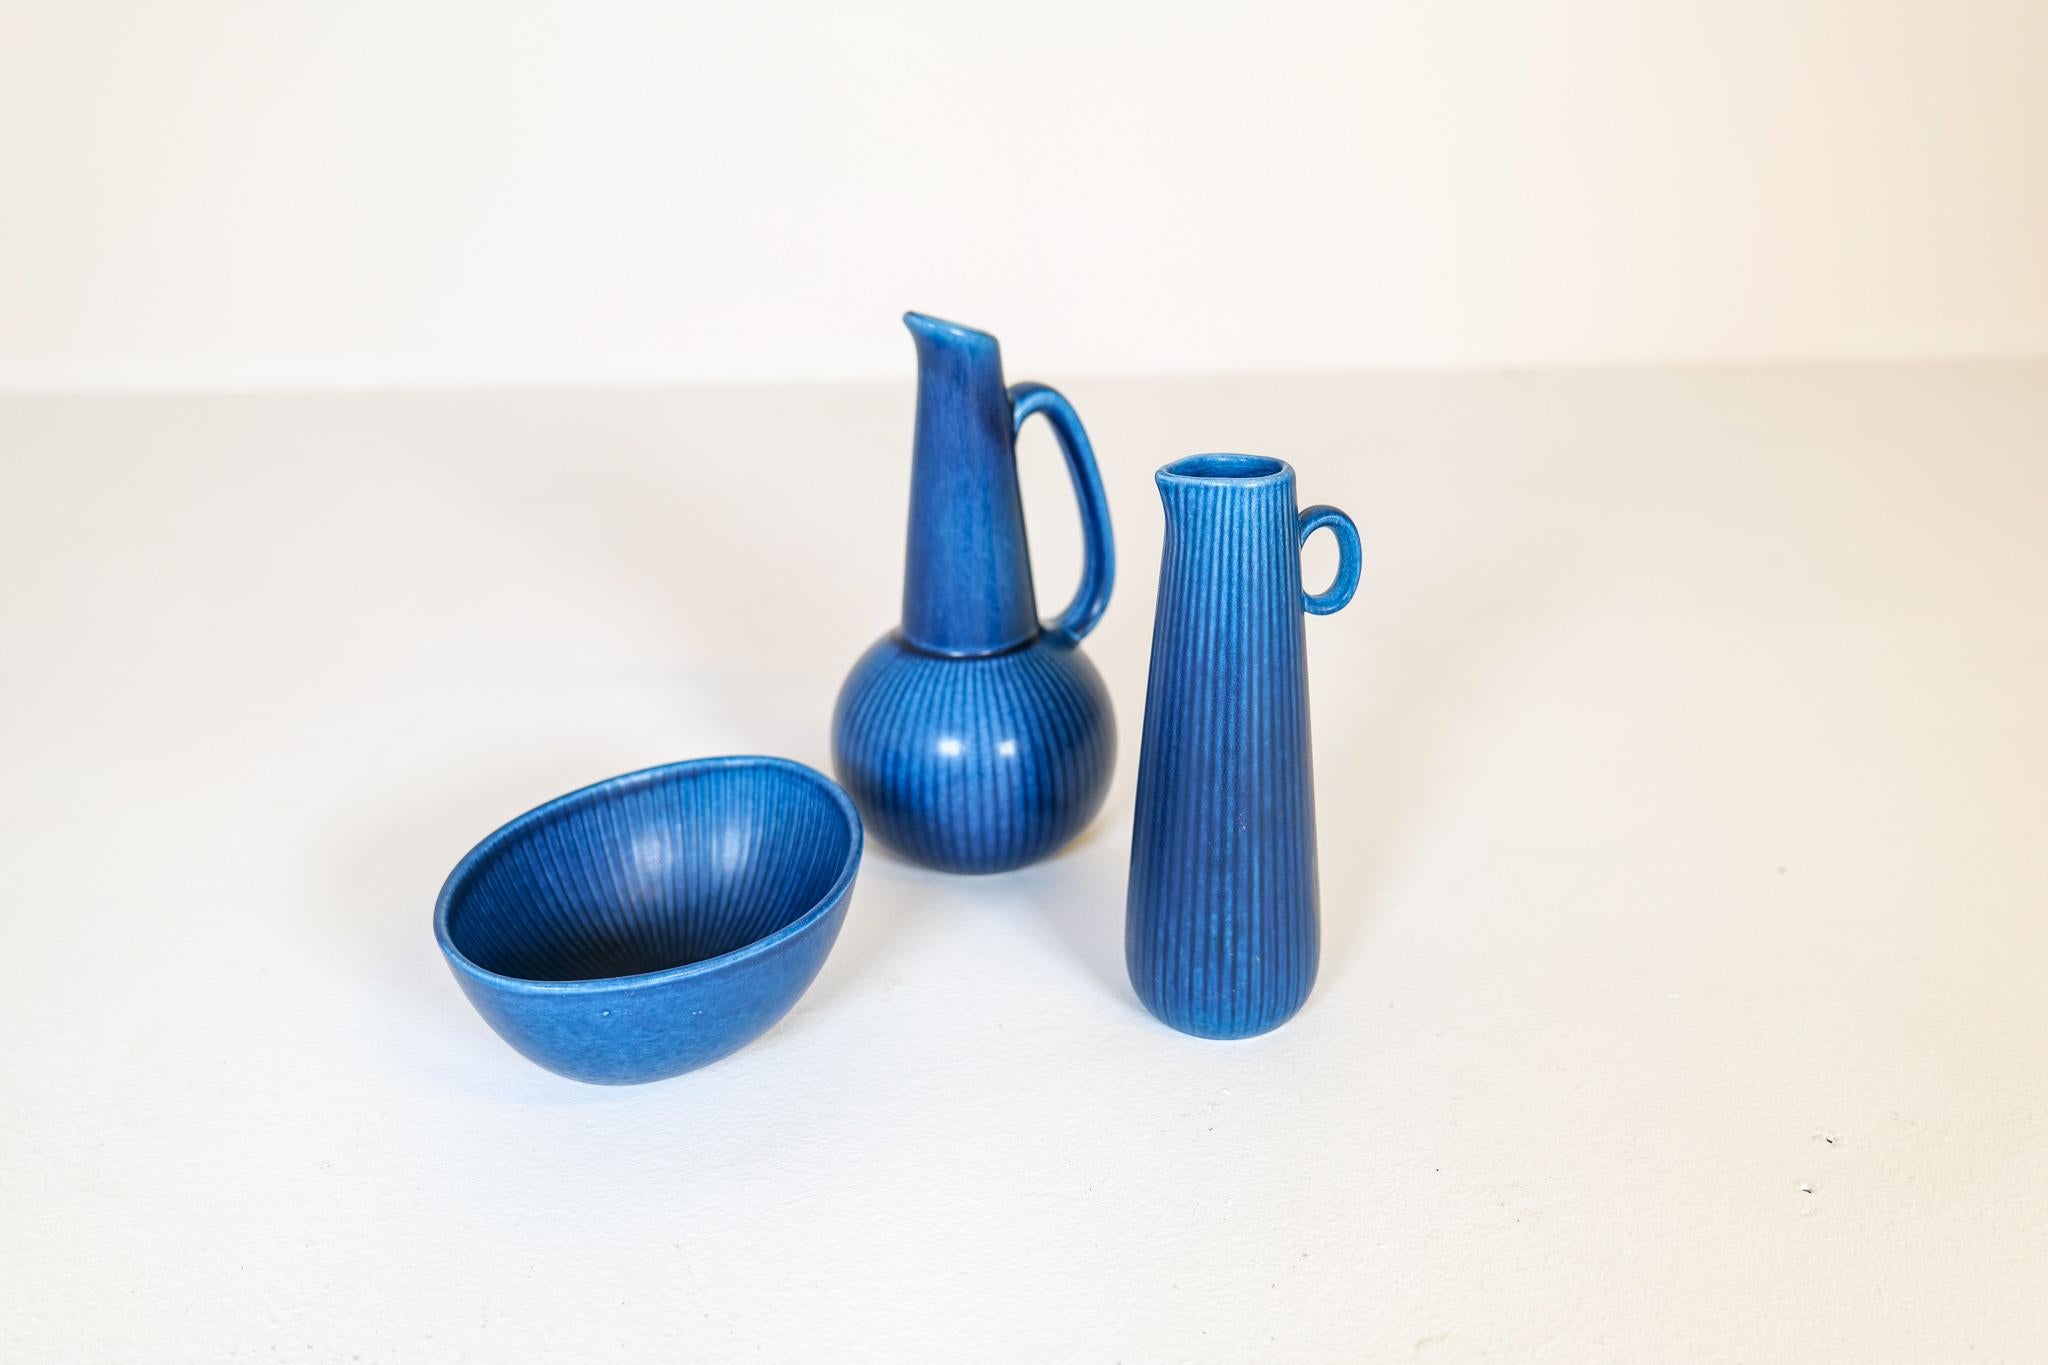 Midcentury Modern Set of 3 Rörstrand Ritzi Vases and Bowl Gunnar Nylund In Good Condition For Sale In Hillringsberg, SE